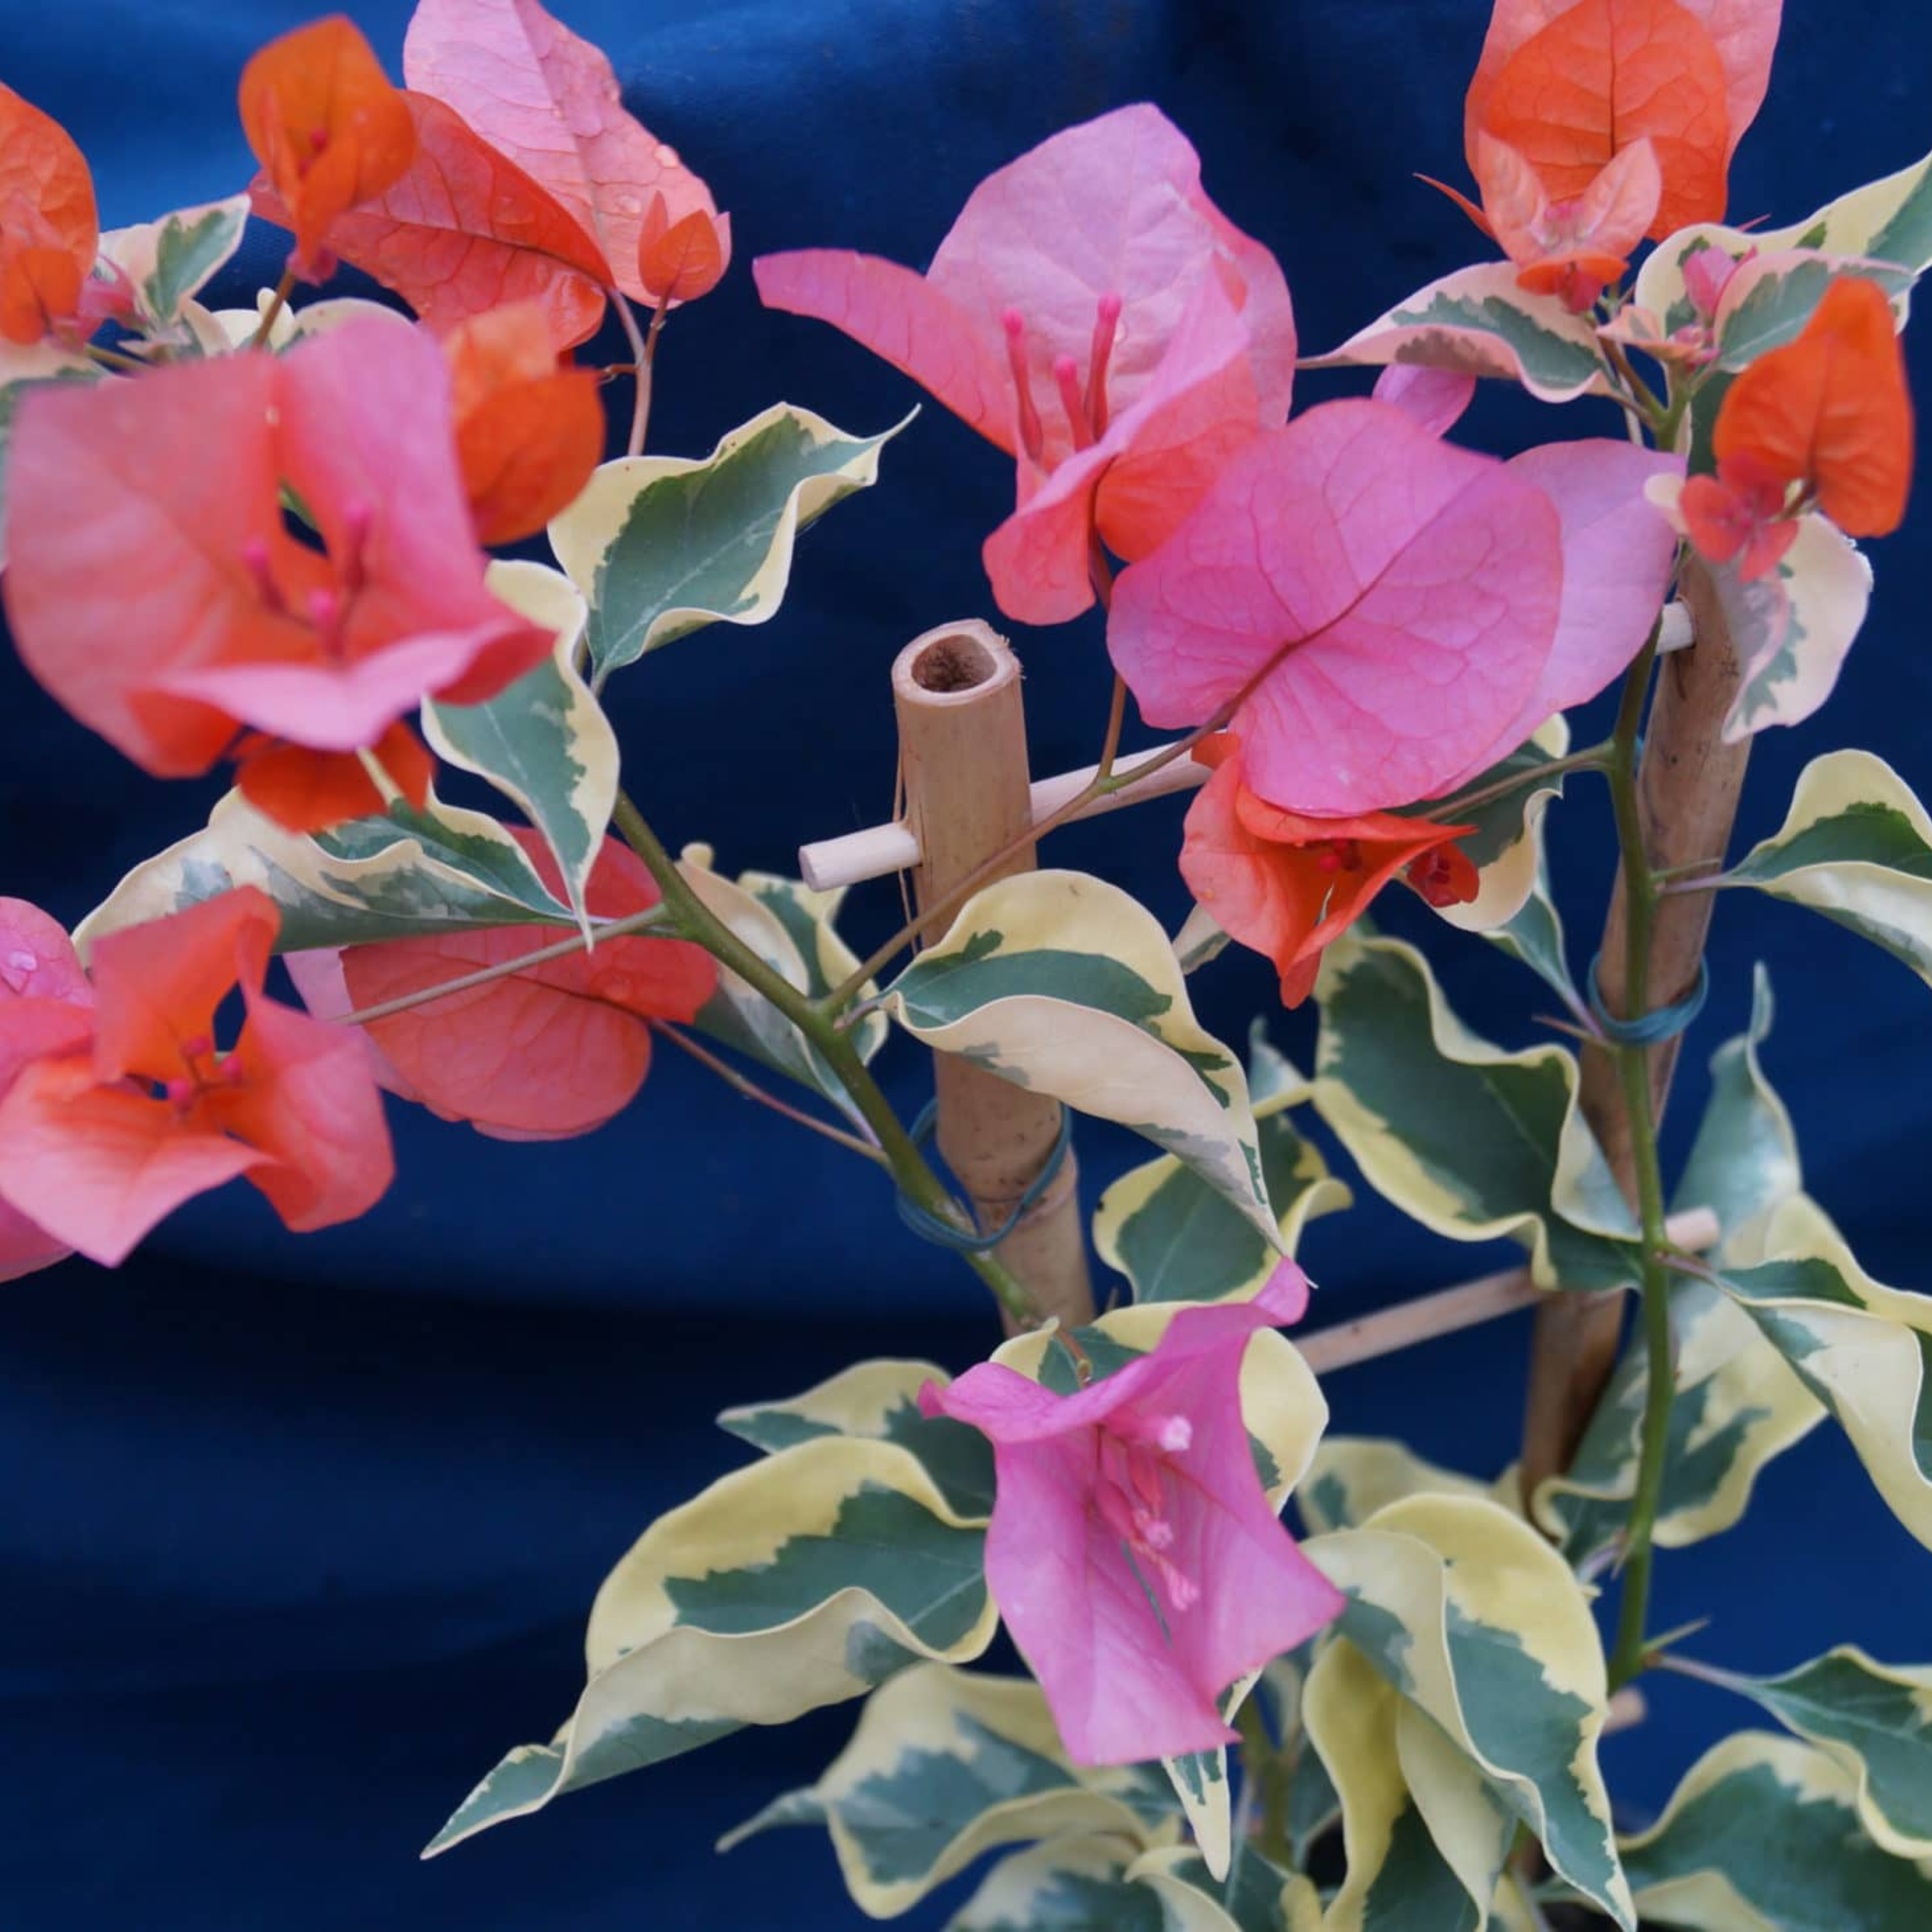 Bougainvillea Variegated with Orange Flowers Rare Flowering Live Plant